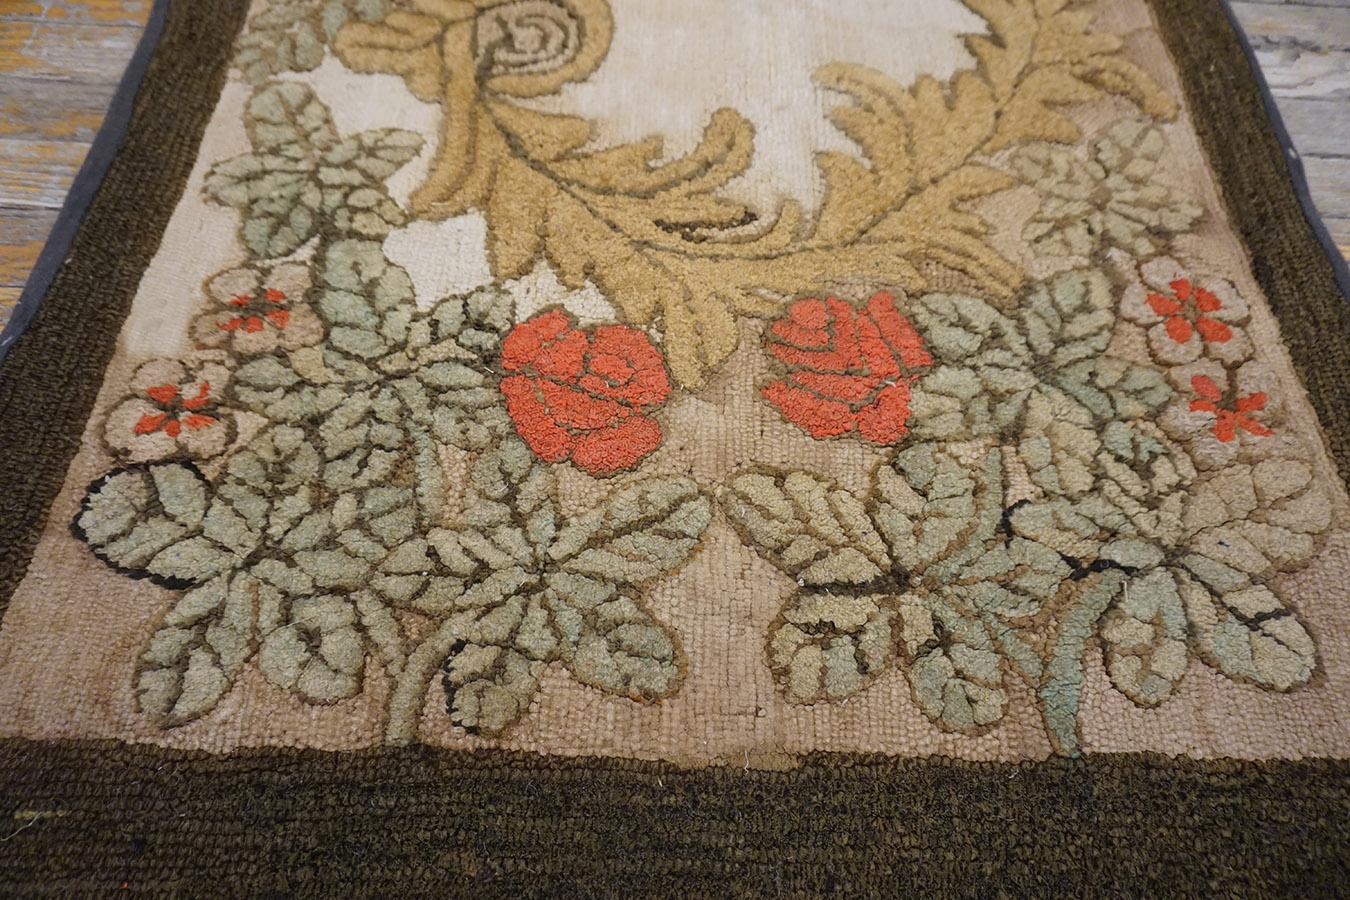 Late 19th Century American Hooked Rug ( 2'8